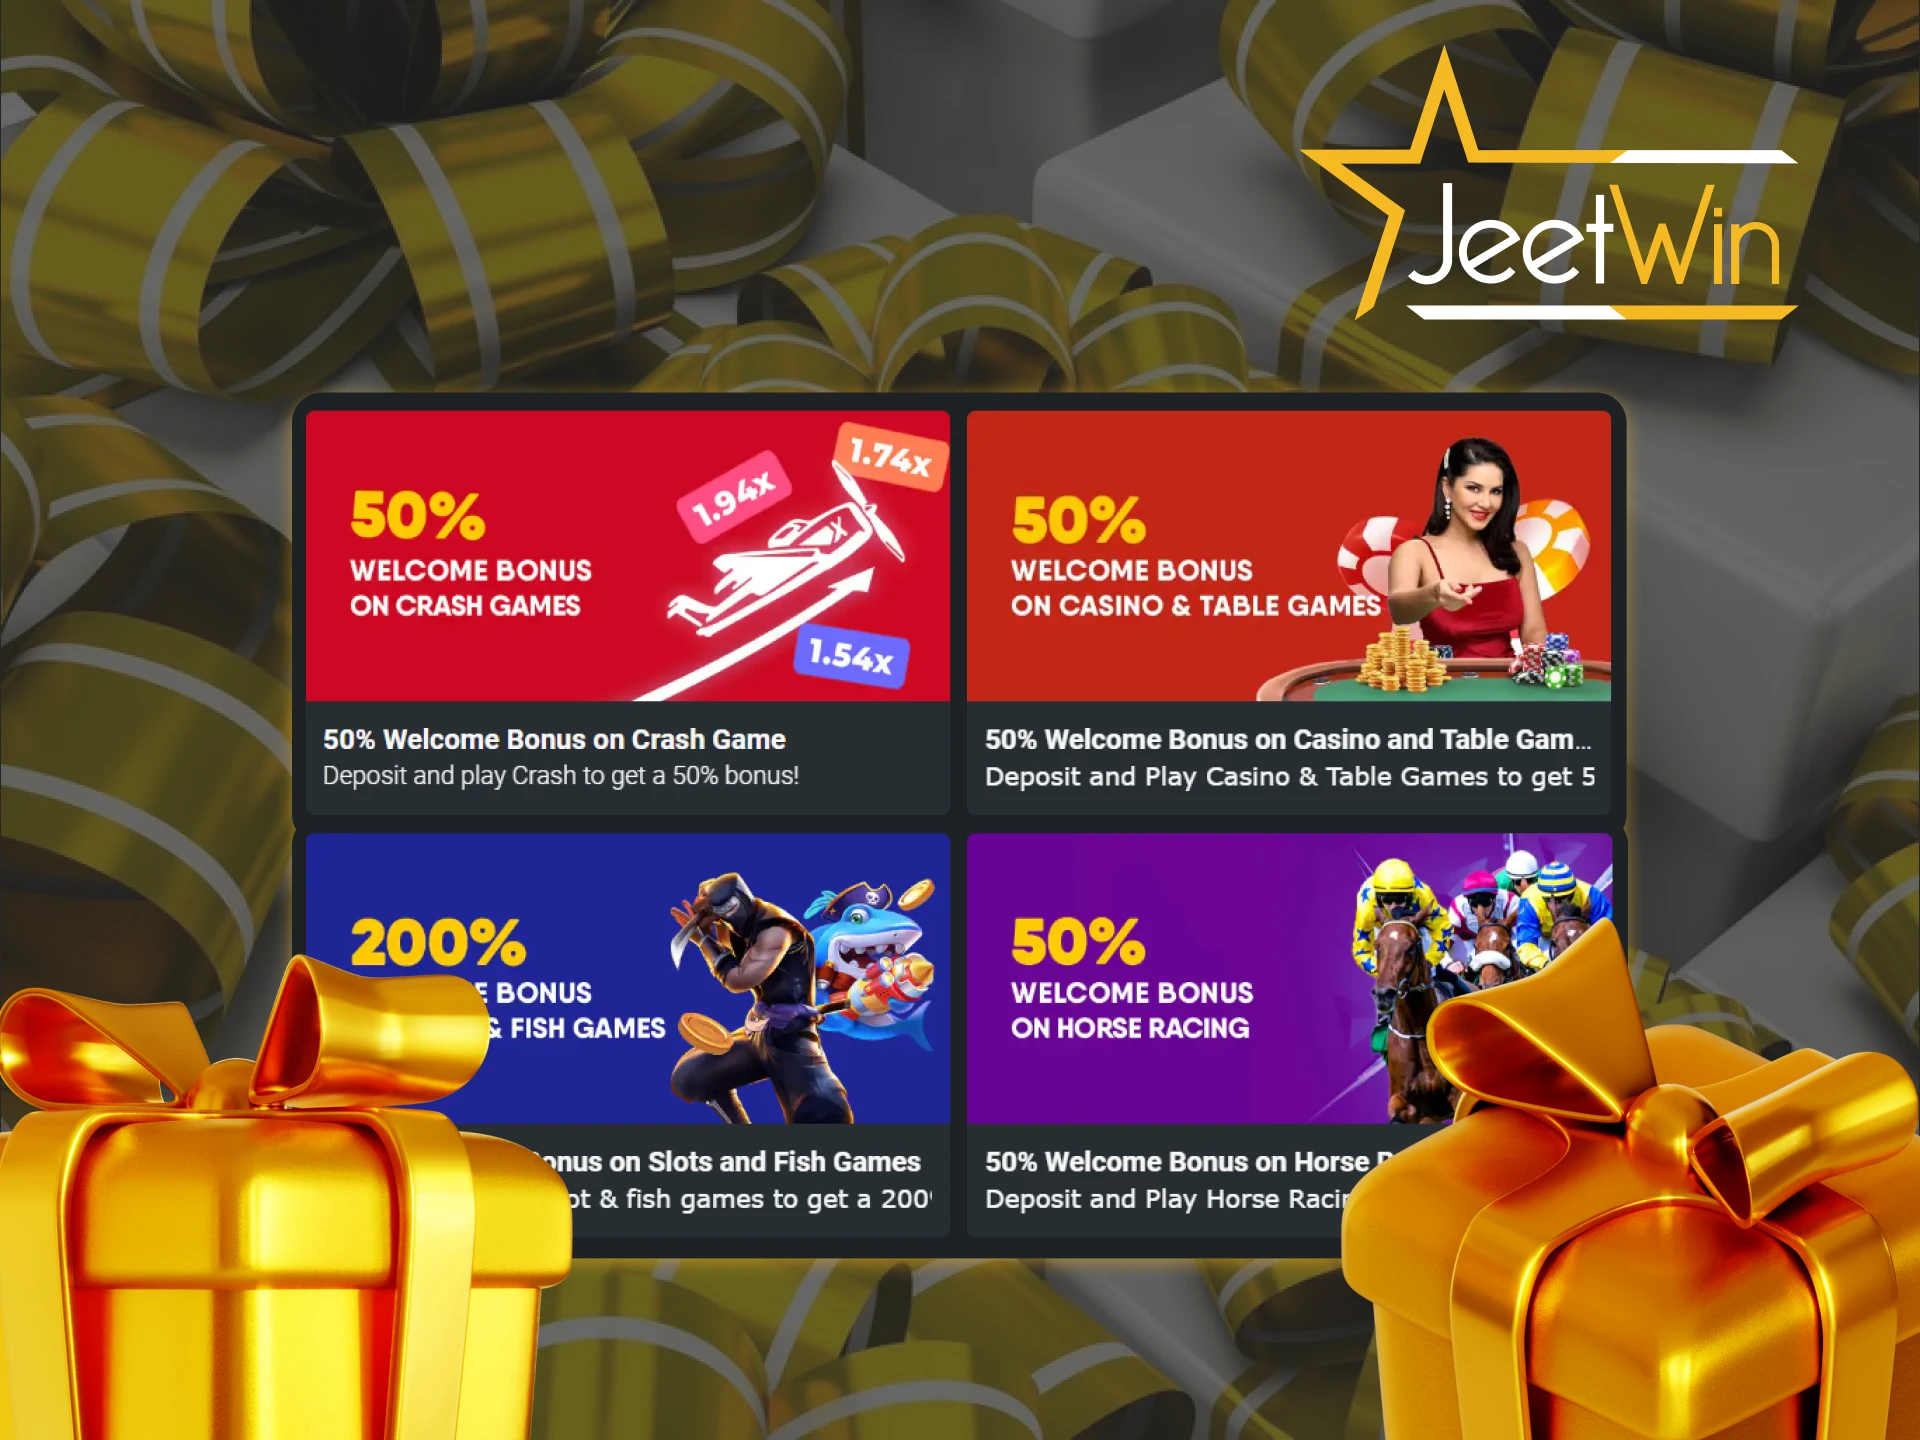 After registering with Jeetwin, you can choose the bonus you like.